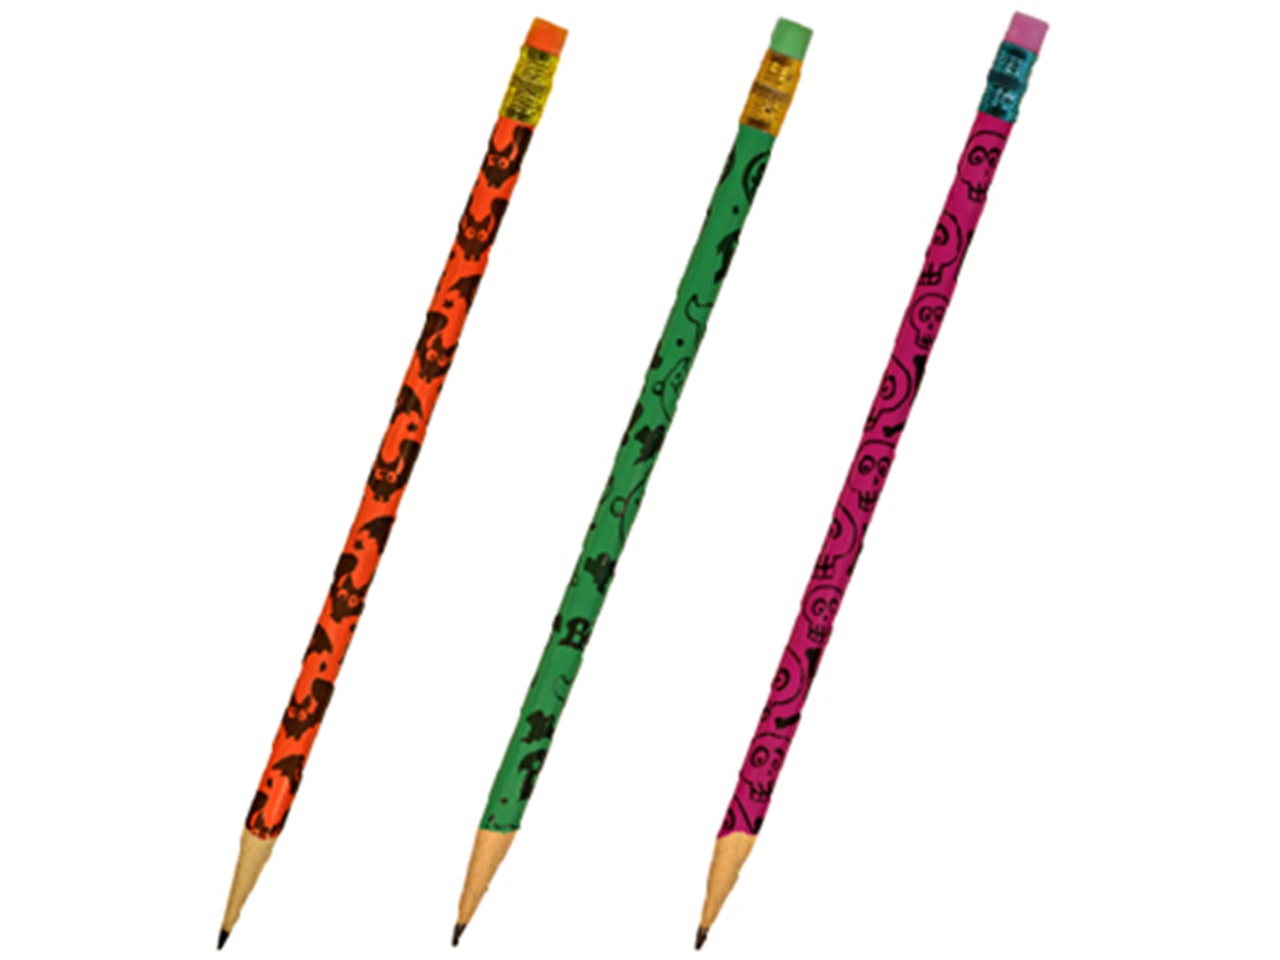 Halloween pencils for trick-or-treating